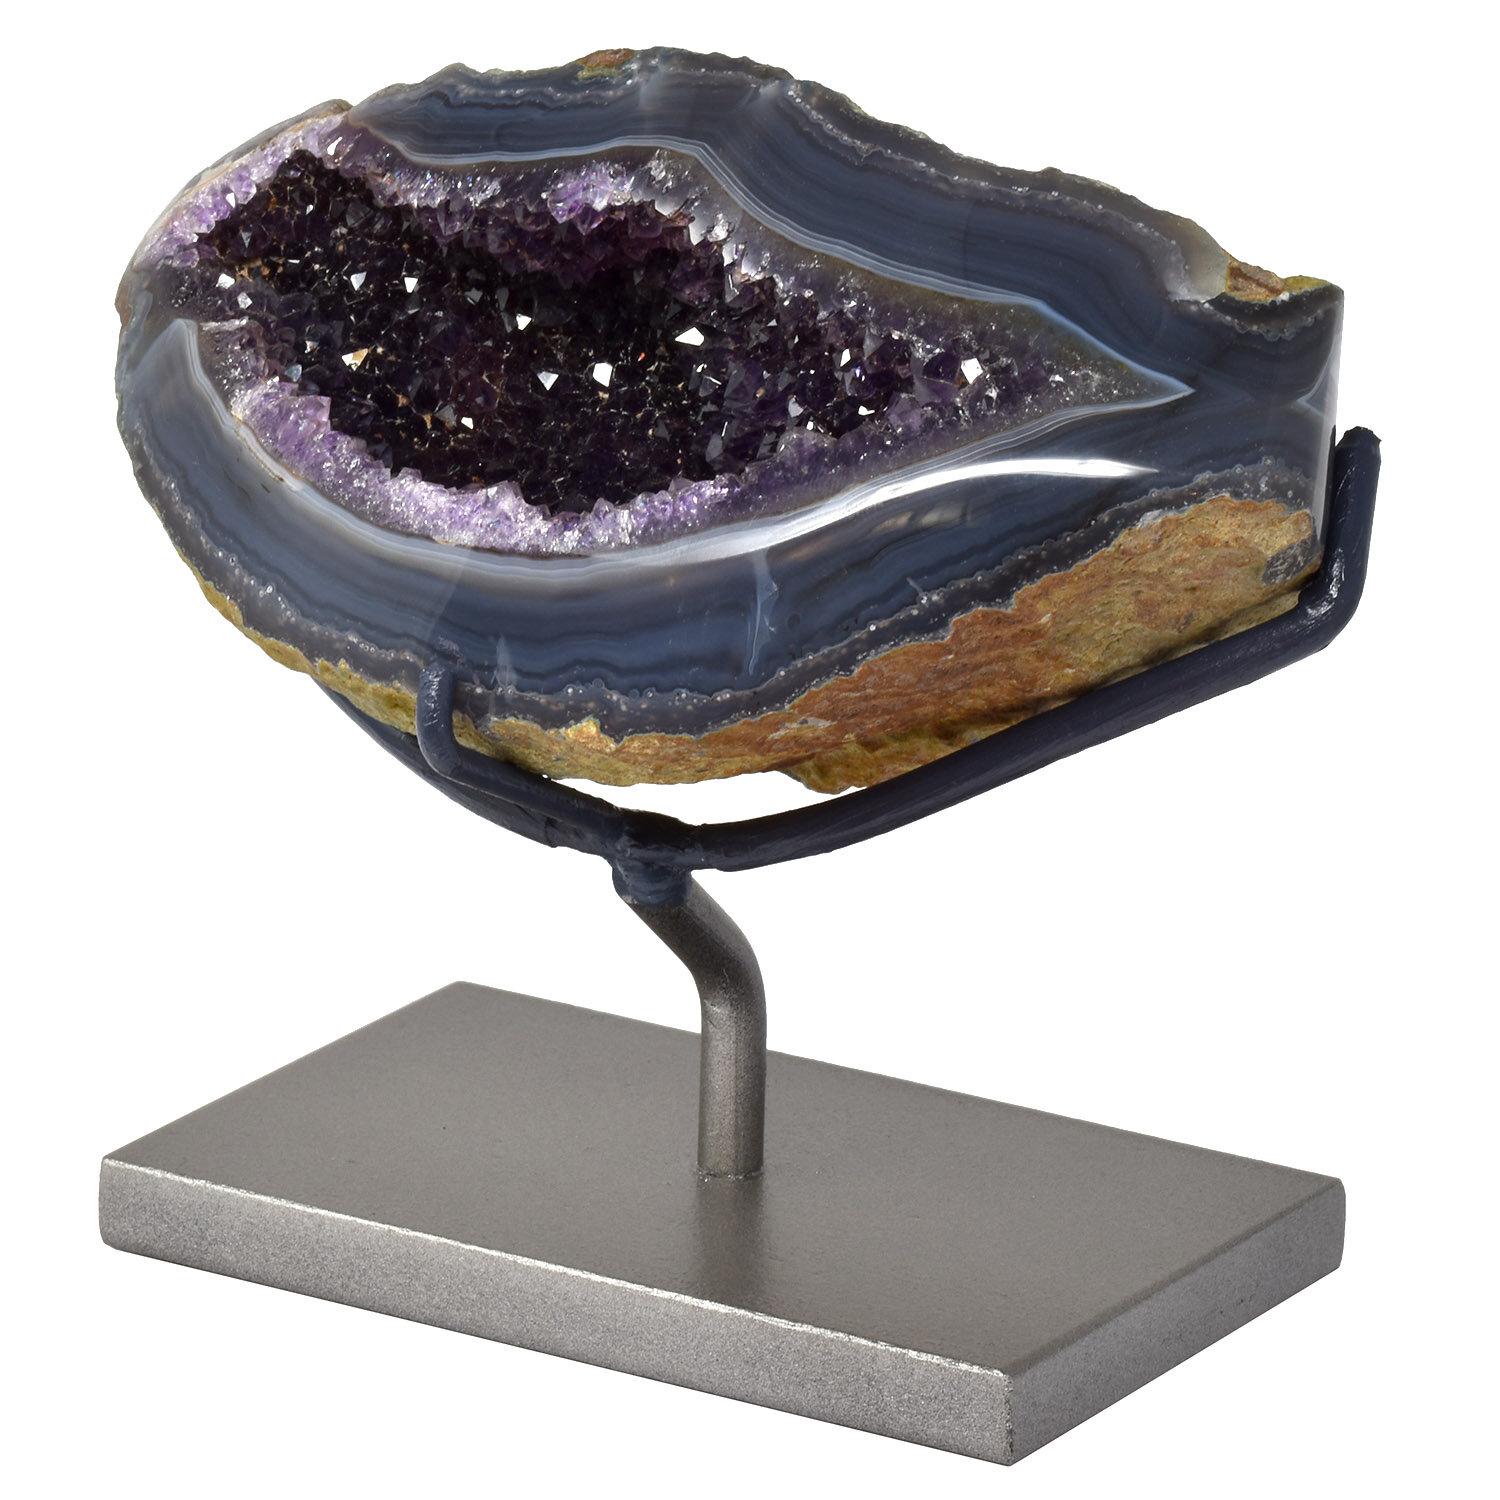 A cut and polished geode, in the form of a large smile
Dimensions: 3 H x 5 W x 3 D in. / 7.5 H x 12.5 W x 7.5 D cm
Height on custom satin nickel display stand 5 in. / 12.5 cm
One of a kind
Amethyst is the birthstone for February

The interior